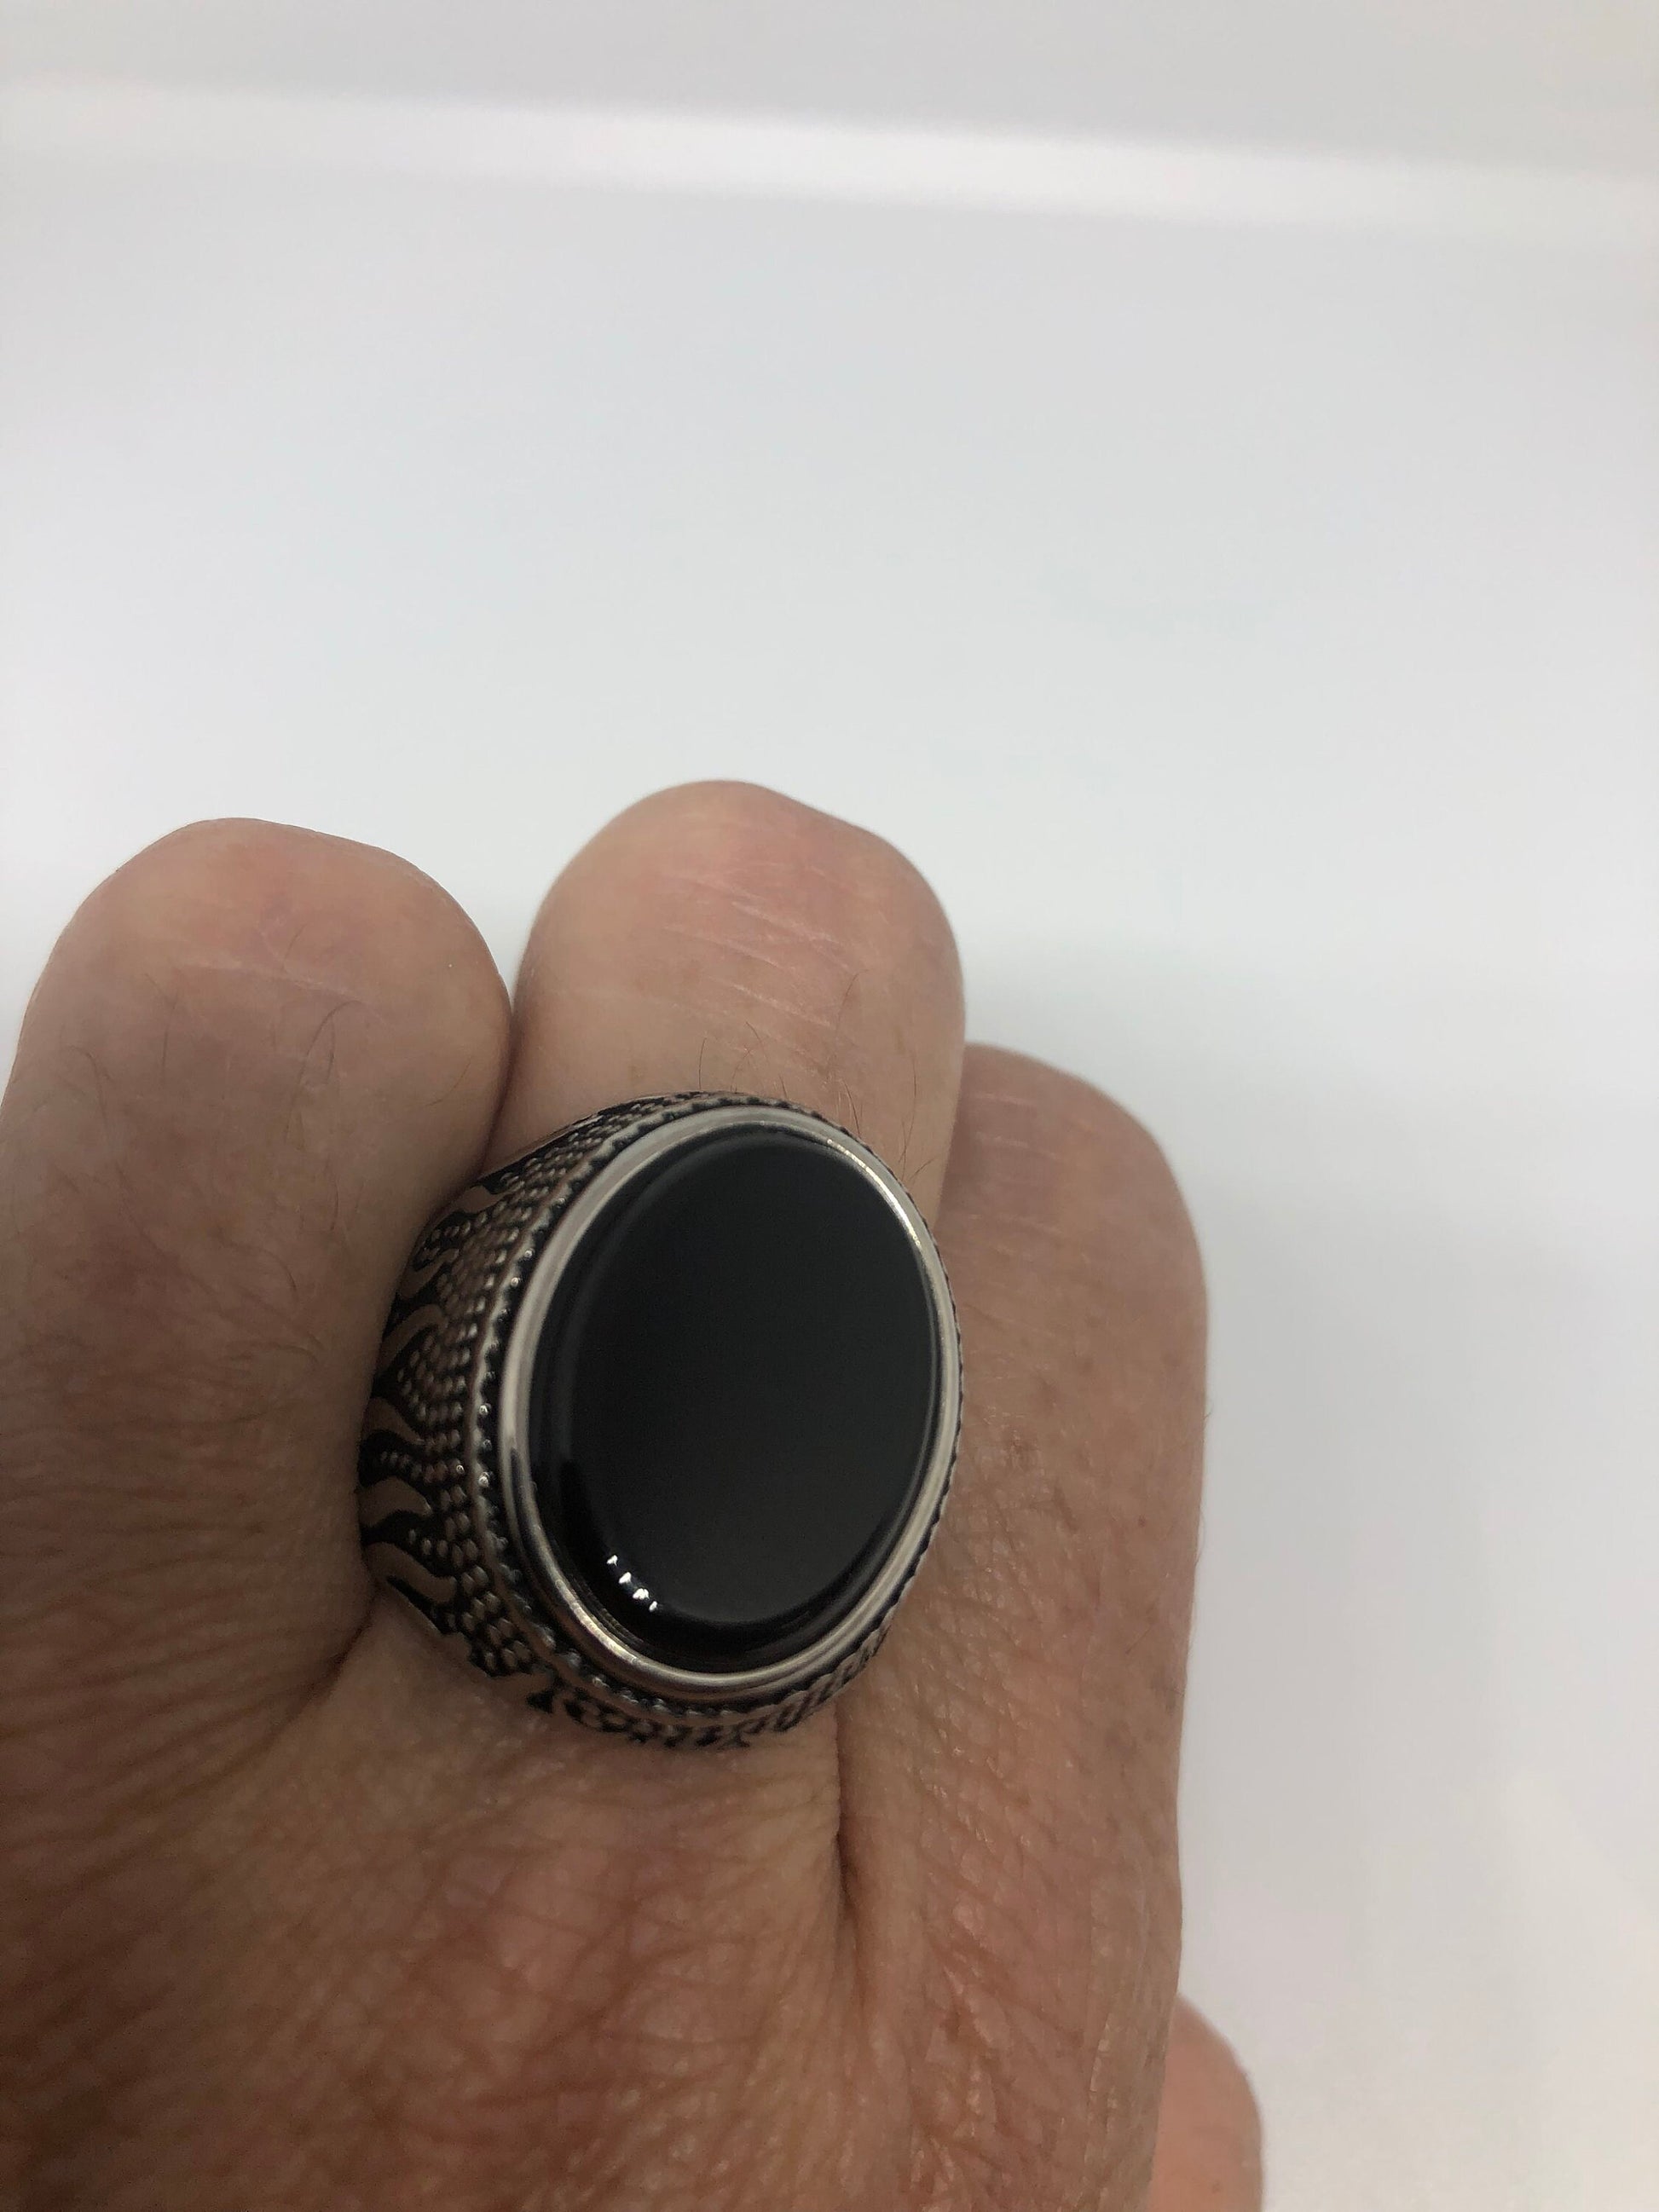 Vintage Gothic Black Onyx Stainless Steel Flame Mens Ring